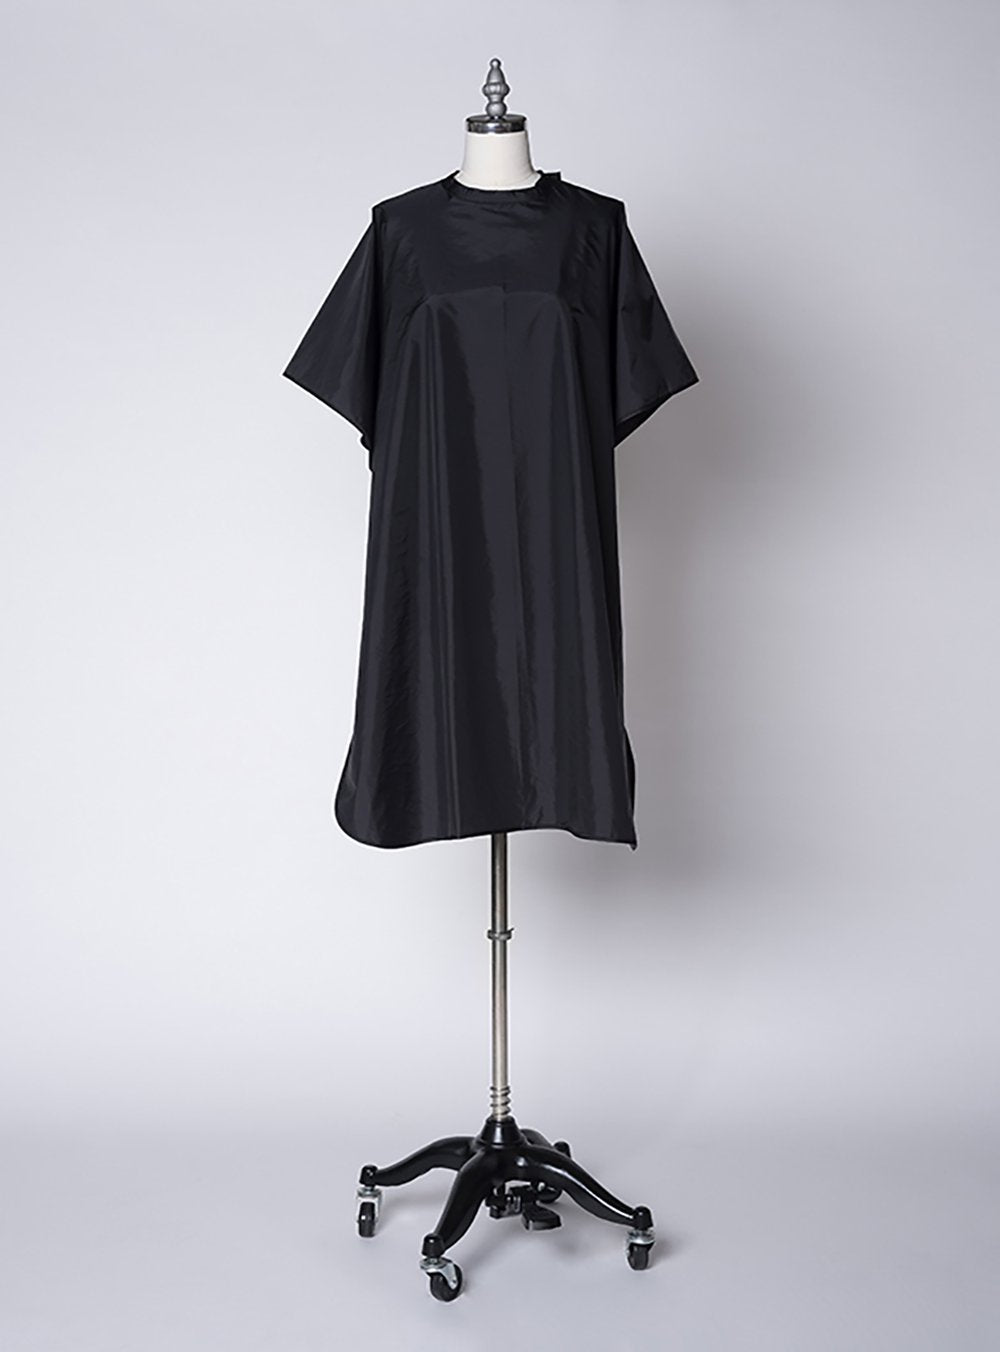 Fromm F7031 Apparel Studio Hairstyling Cape